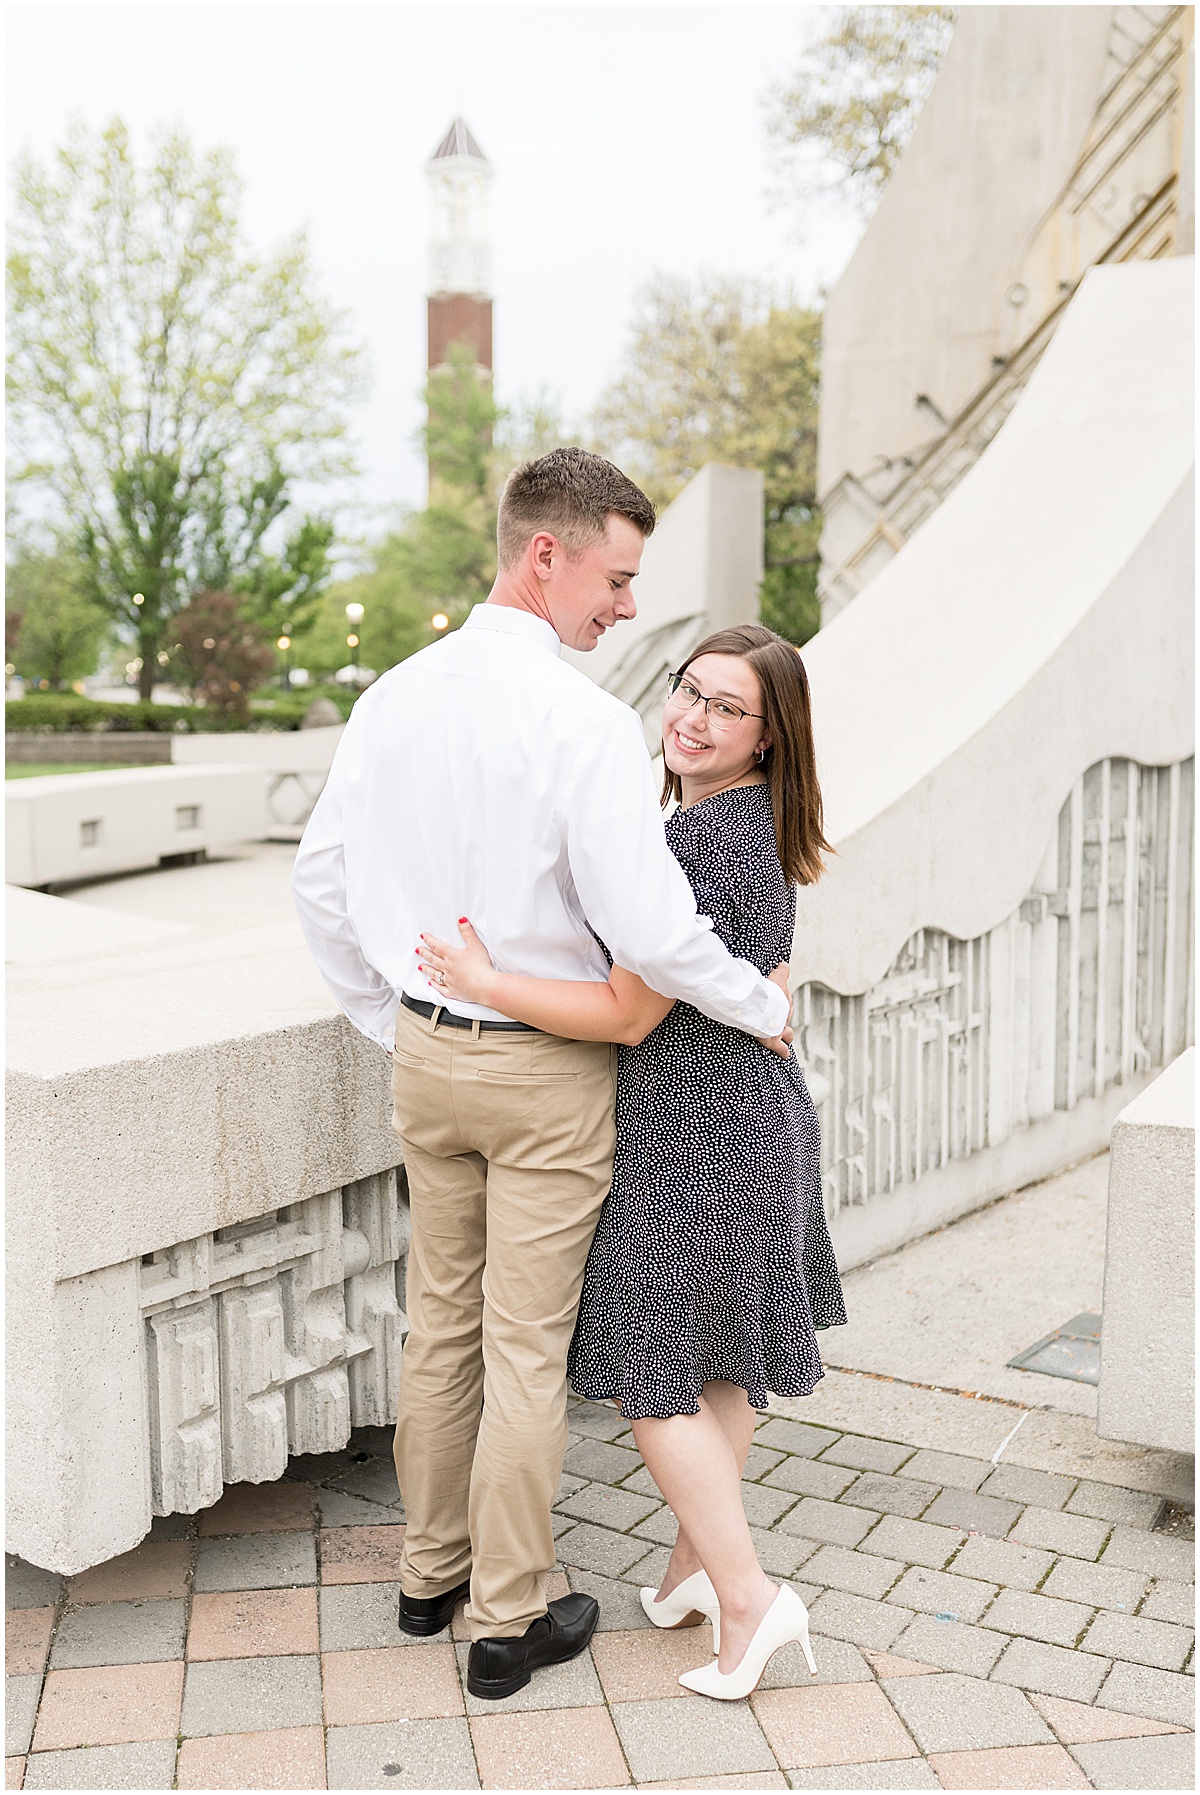 Couple hugging during engagement and graduation photos at Purdue University by Purdue's Engineering Fountain